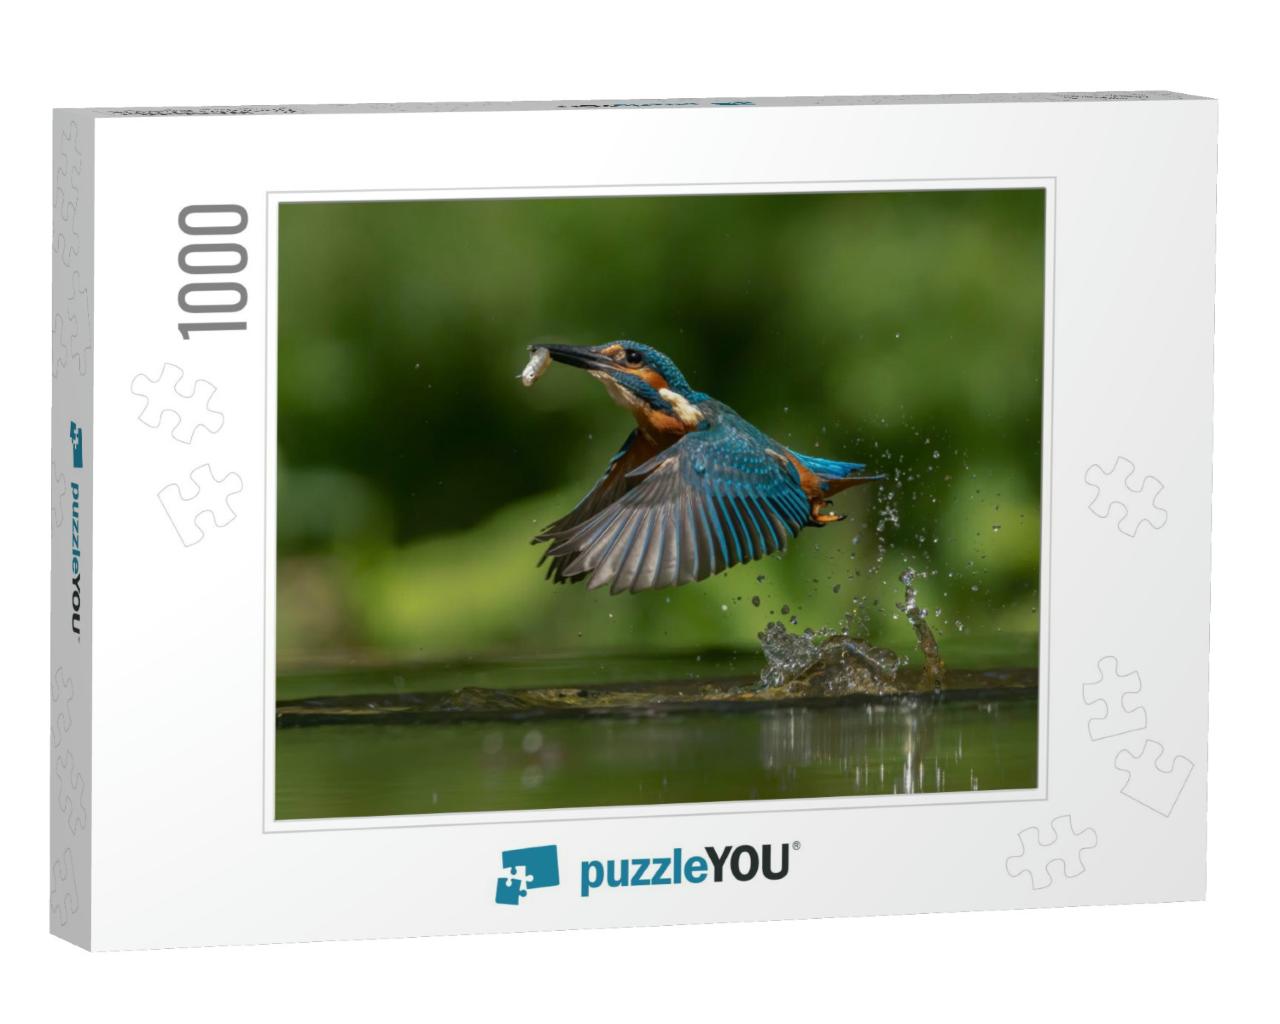 Common European Kingfisher Alcedo Atthis. Kingfisher Flyi... Jigsaw Puzzle with 1000 pieces